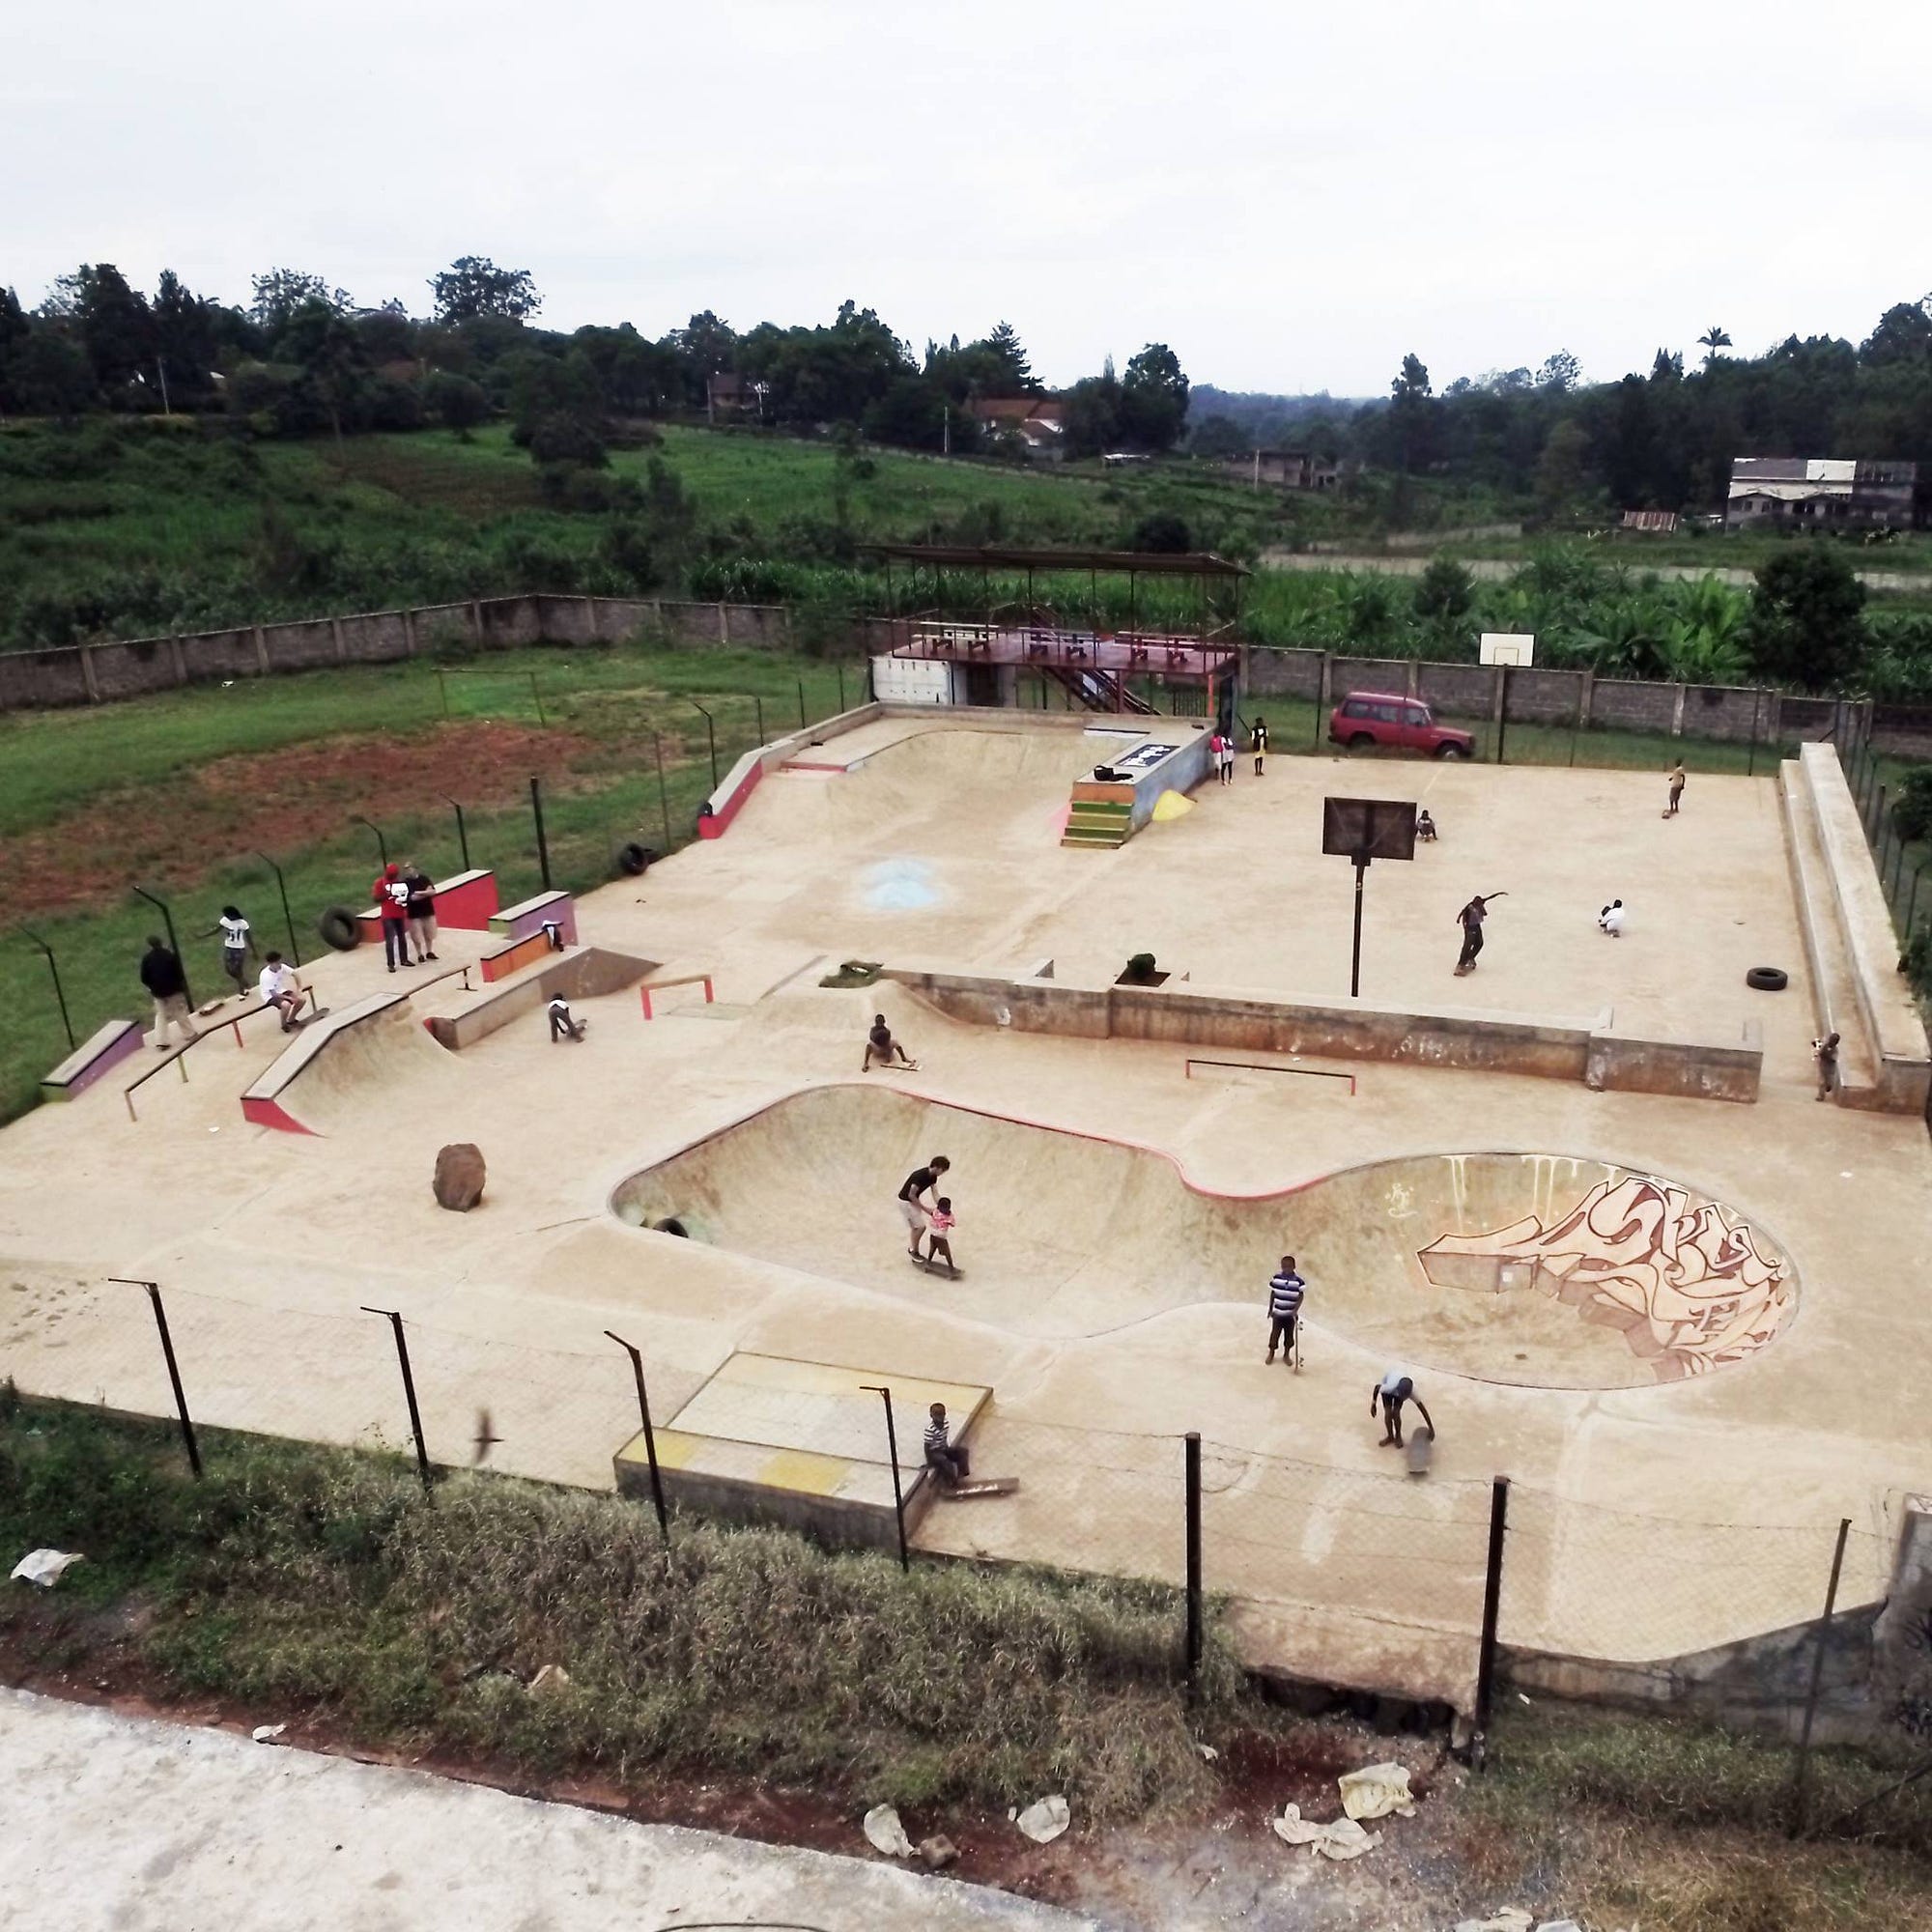 Dropping-in with no shoes on: Building skateparks in East Africa | by Tim  Romain | STORIES@SOAS | Medium